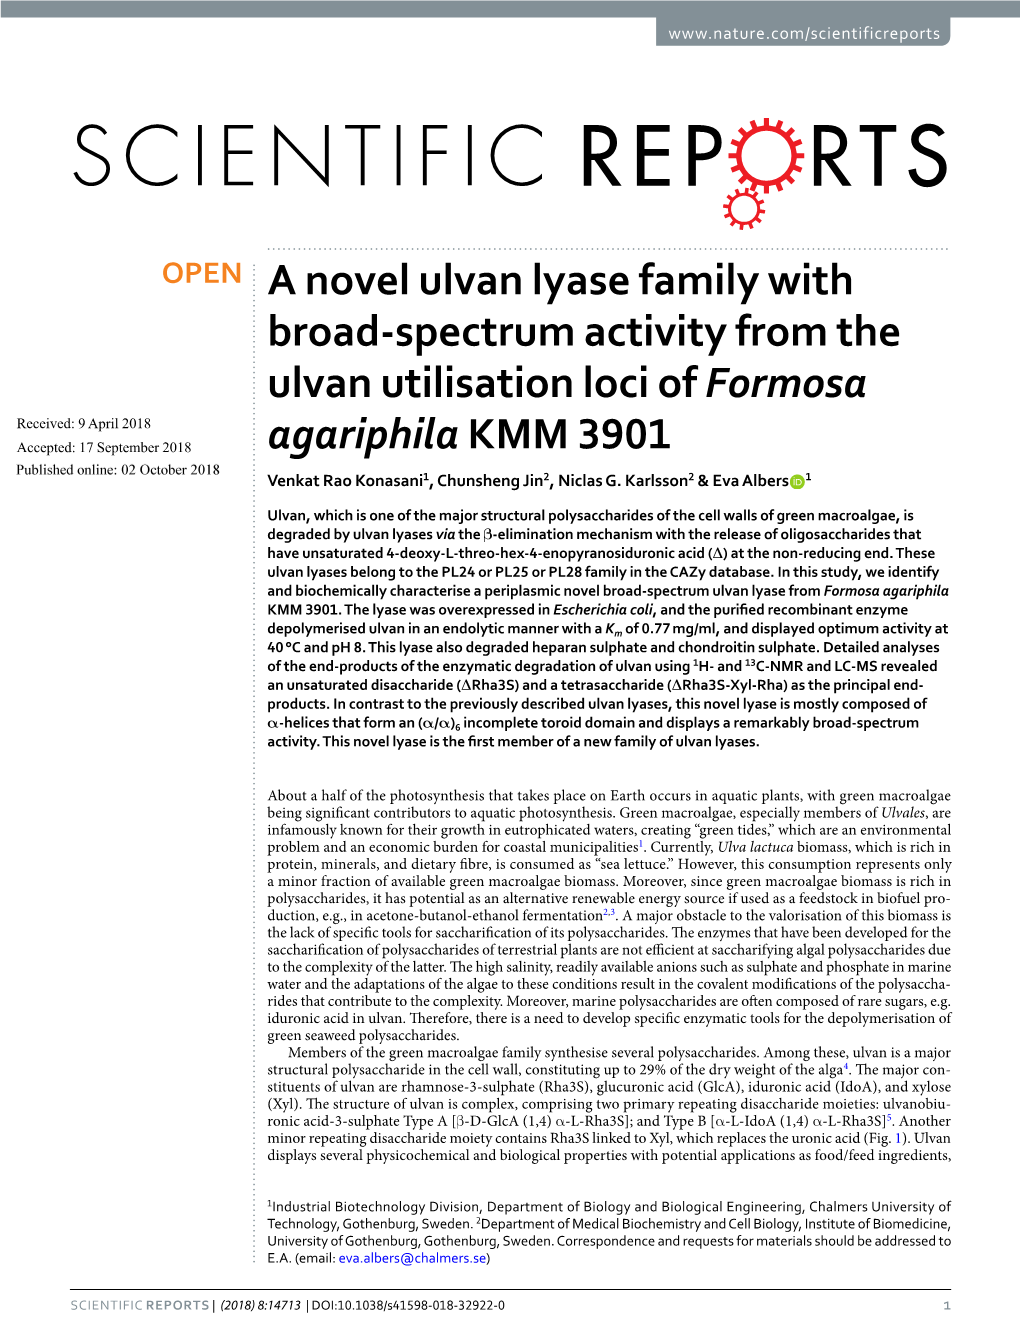 A Novel Ulvan Lyase Family with Broad-Spectrum Activity from The